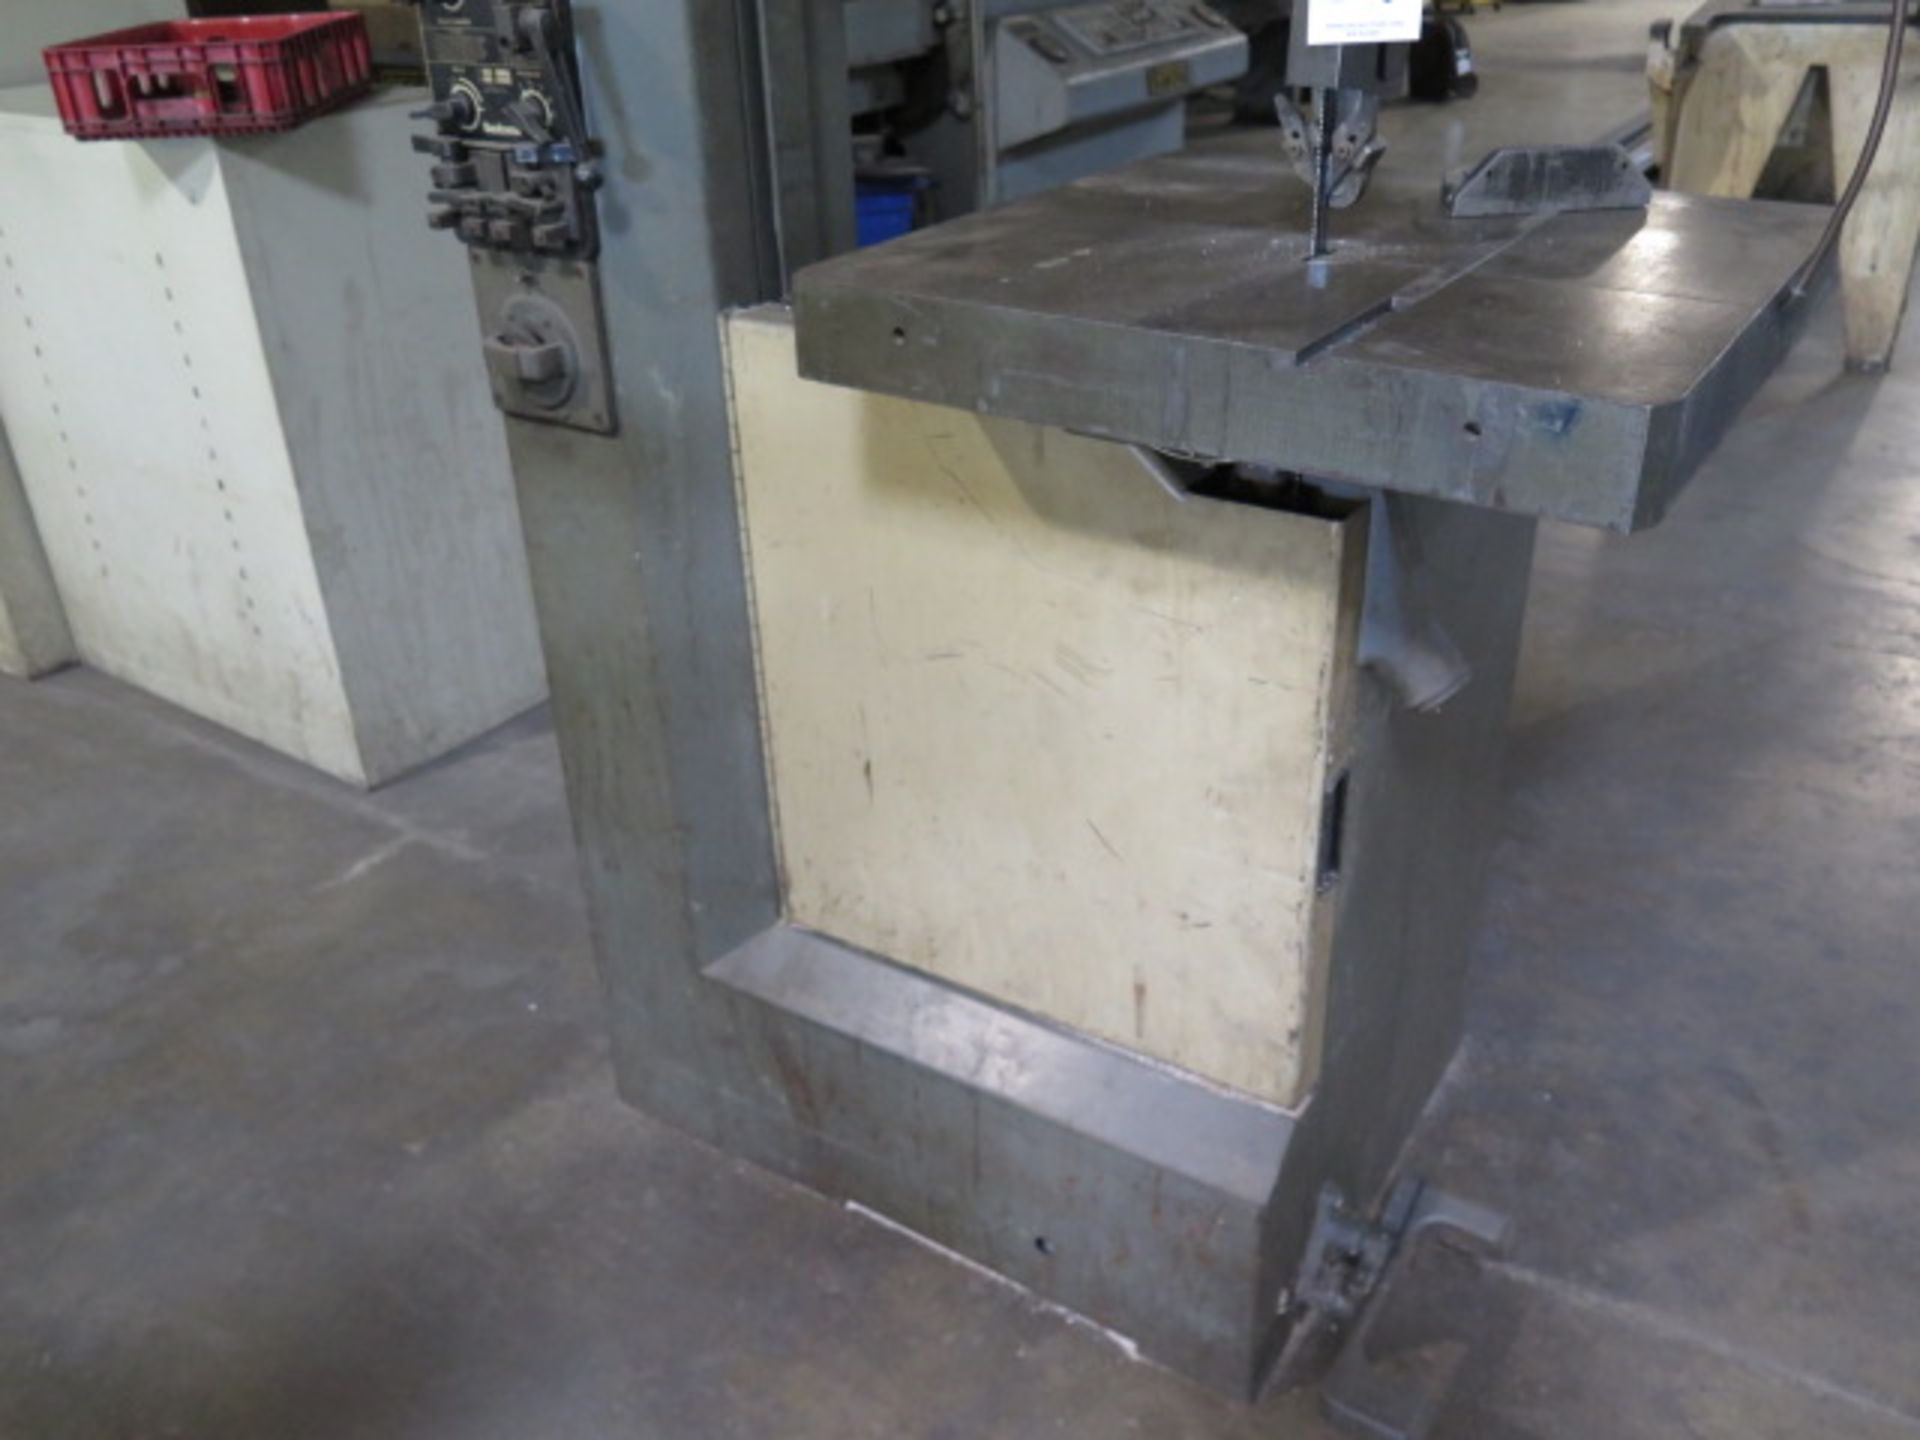 Rockwell 20” Vertical Band Saw s/n 1814408 w/ Blade Welder, 50-4500 FPM, 24” x 24” Table,SOLD AS IS - Image 4 of 7